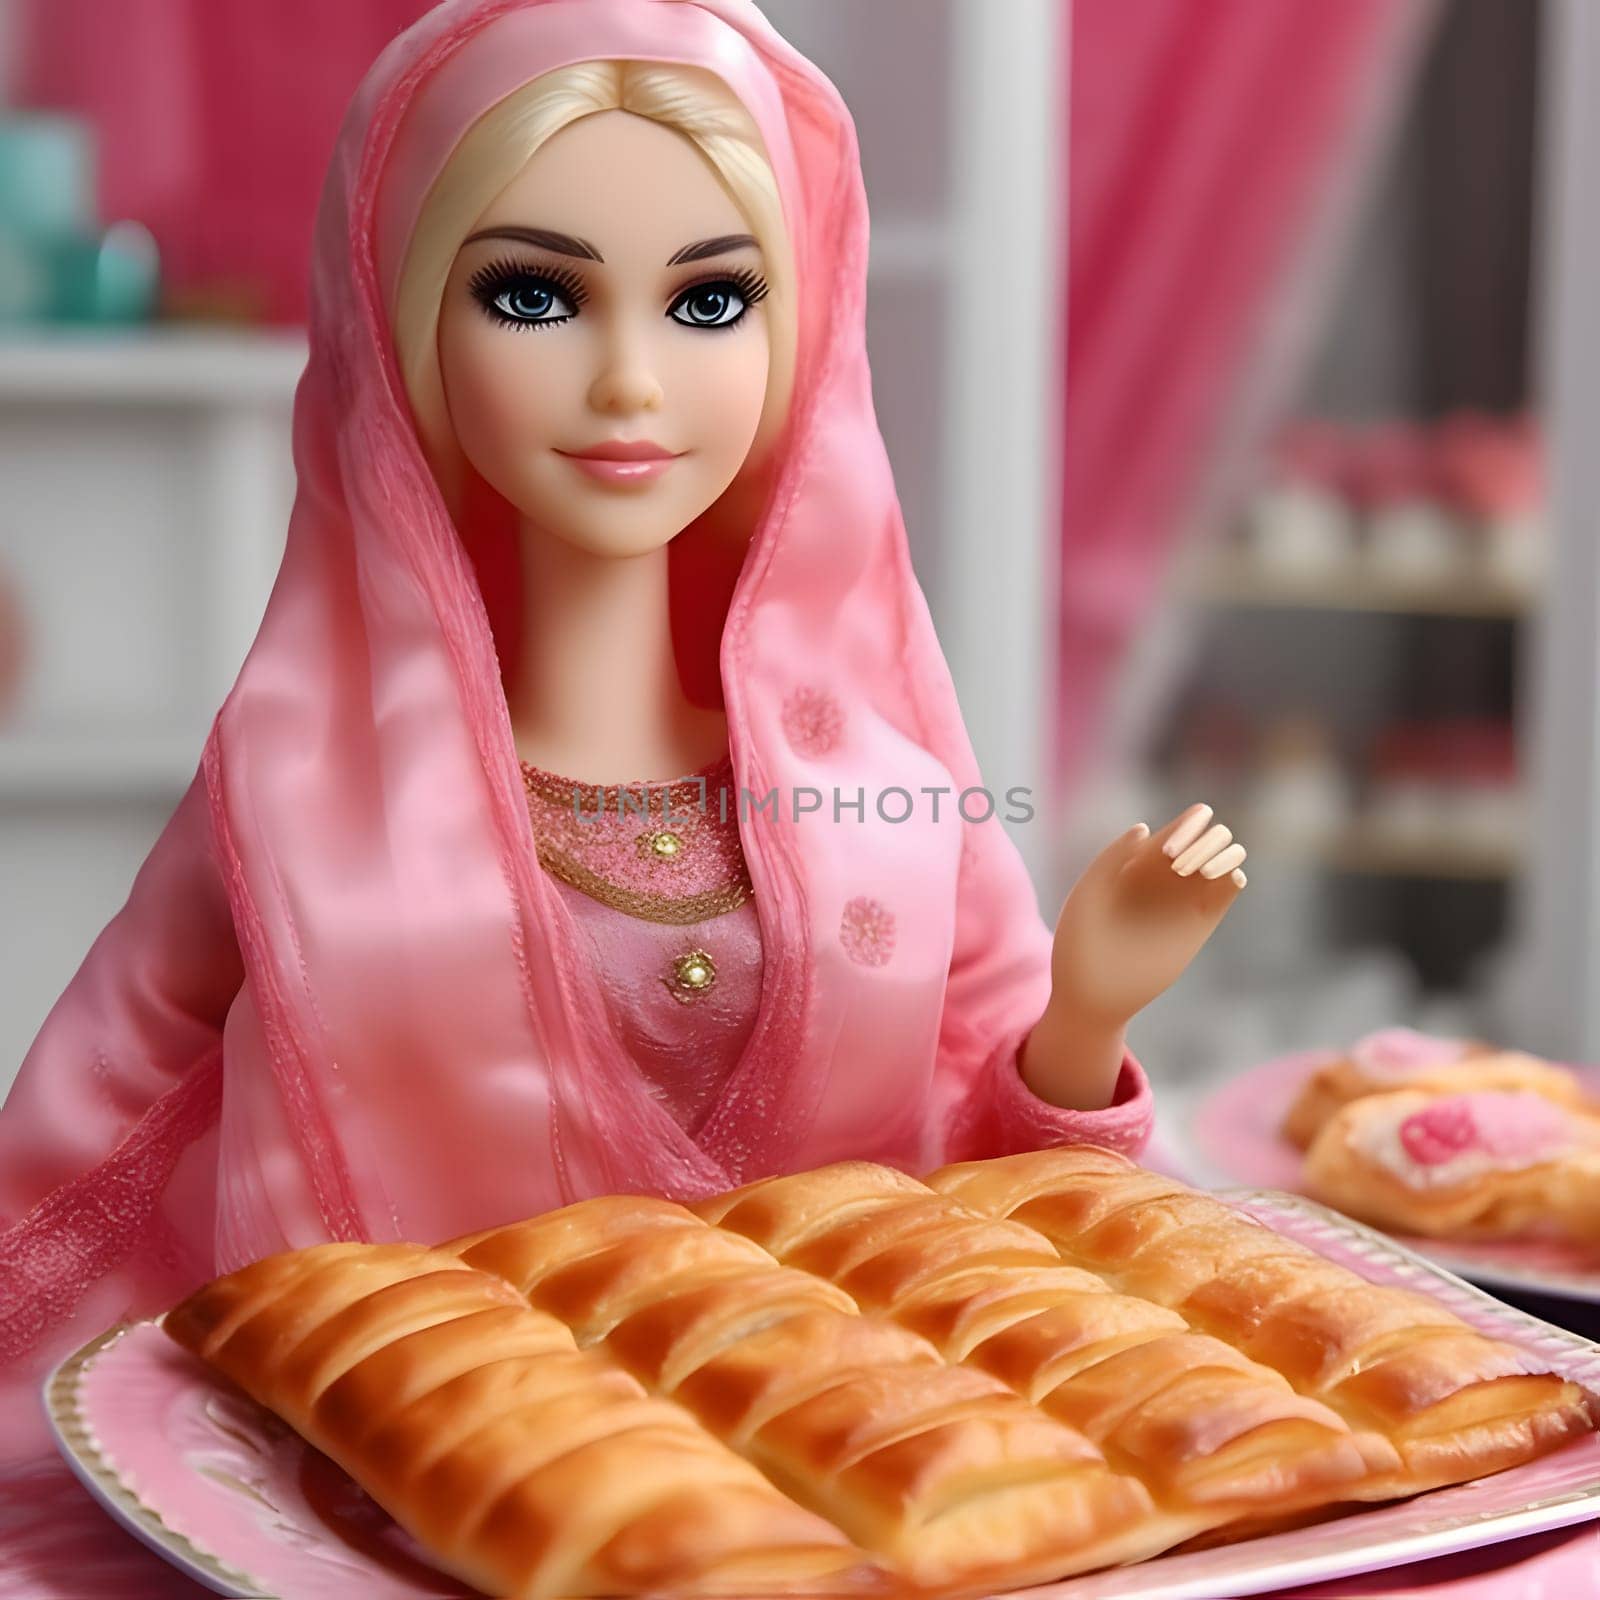 Charming blonde Barbie, dressed in pink, holding sweet treats, against a blurred background. The side view captures her joyful moment with sugary delights.